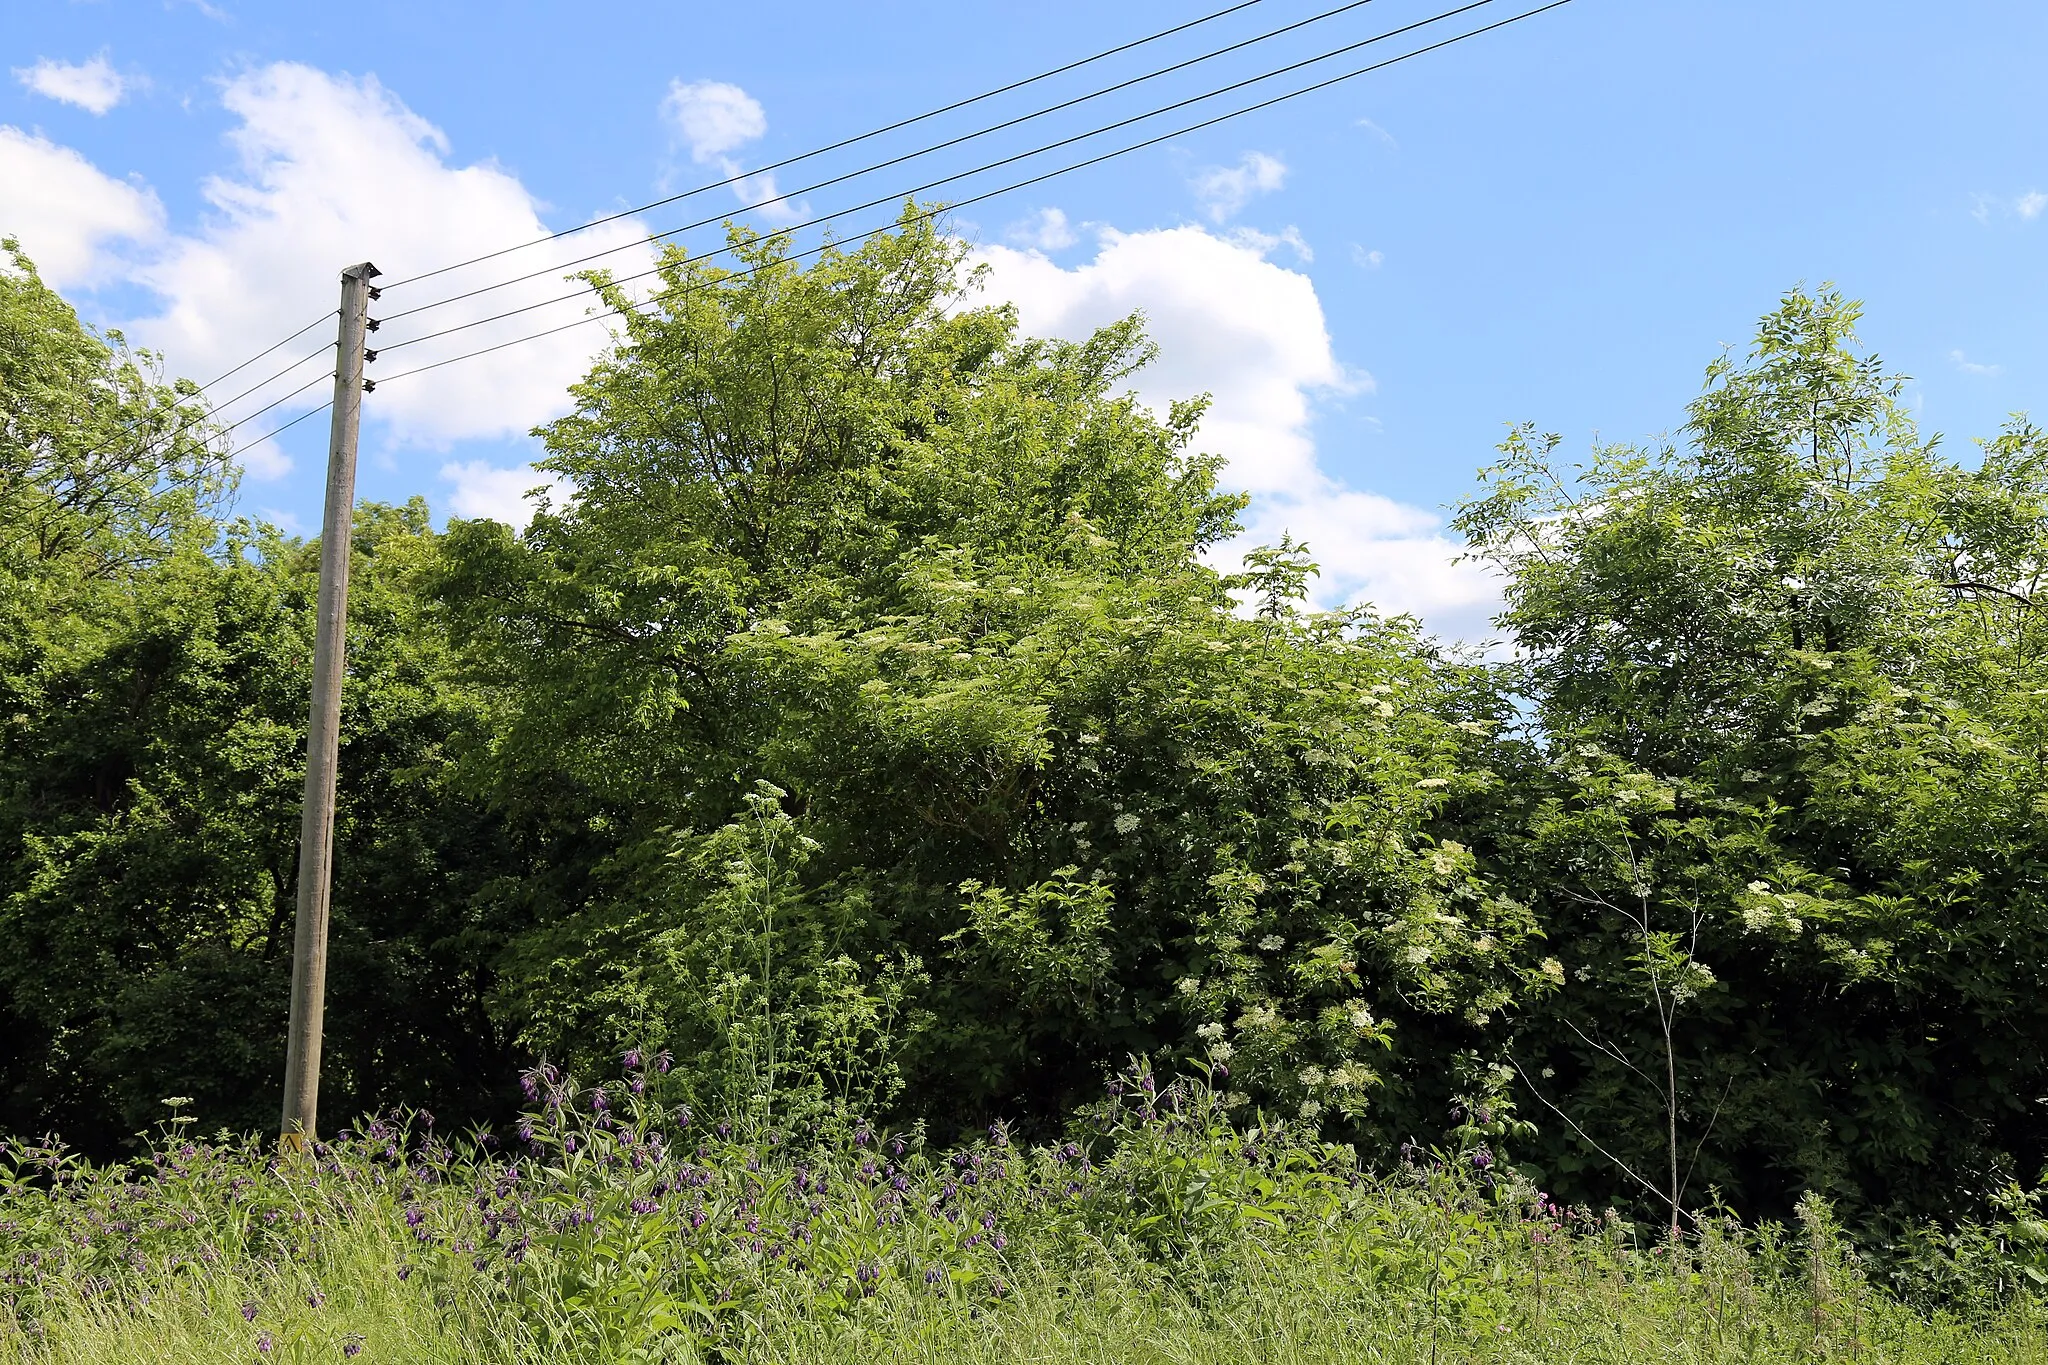 Photo showing: A field off Gainsthorpe Road in Bobbingworth, Essex, England, and 200 yards northeast from St Germain's Church. Plants include grasses and cow parsley.